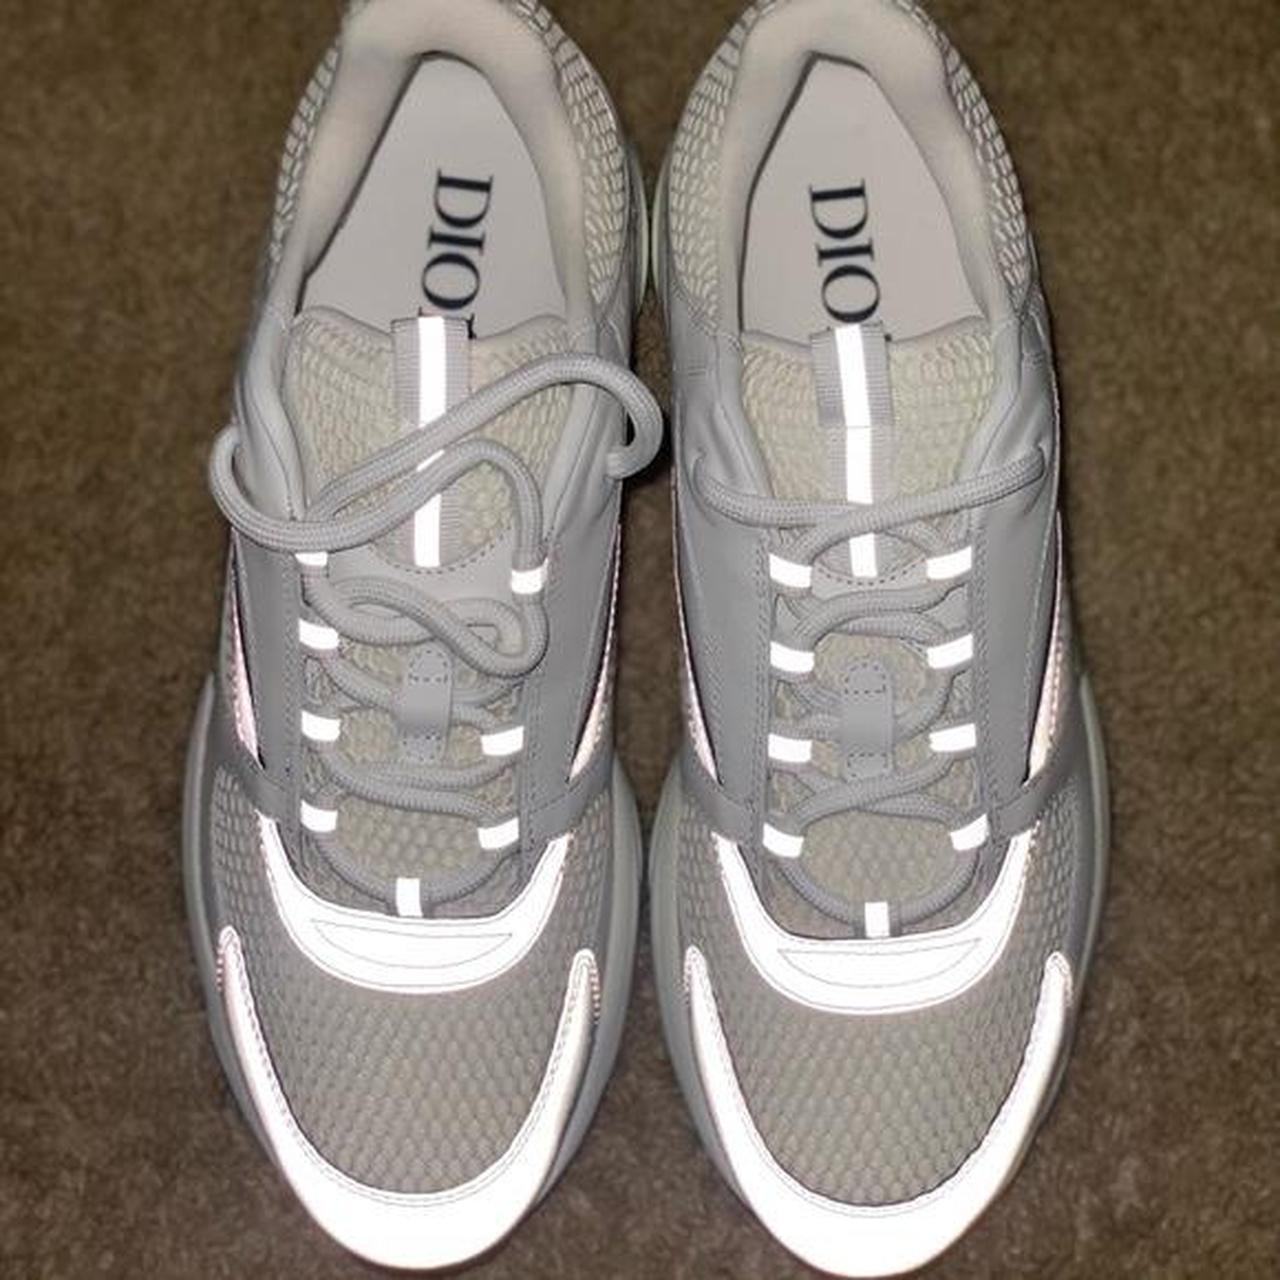 Christian Dior Men's Grey and White Trainers | Depop